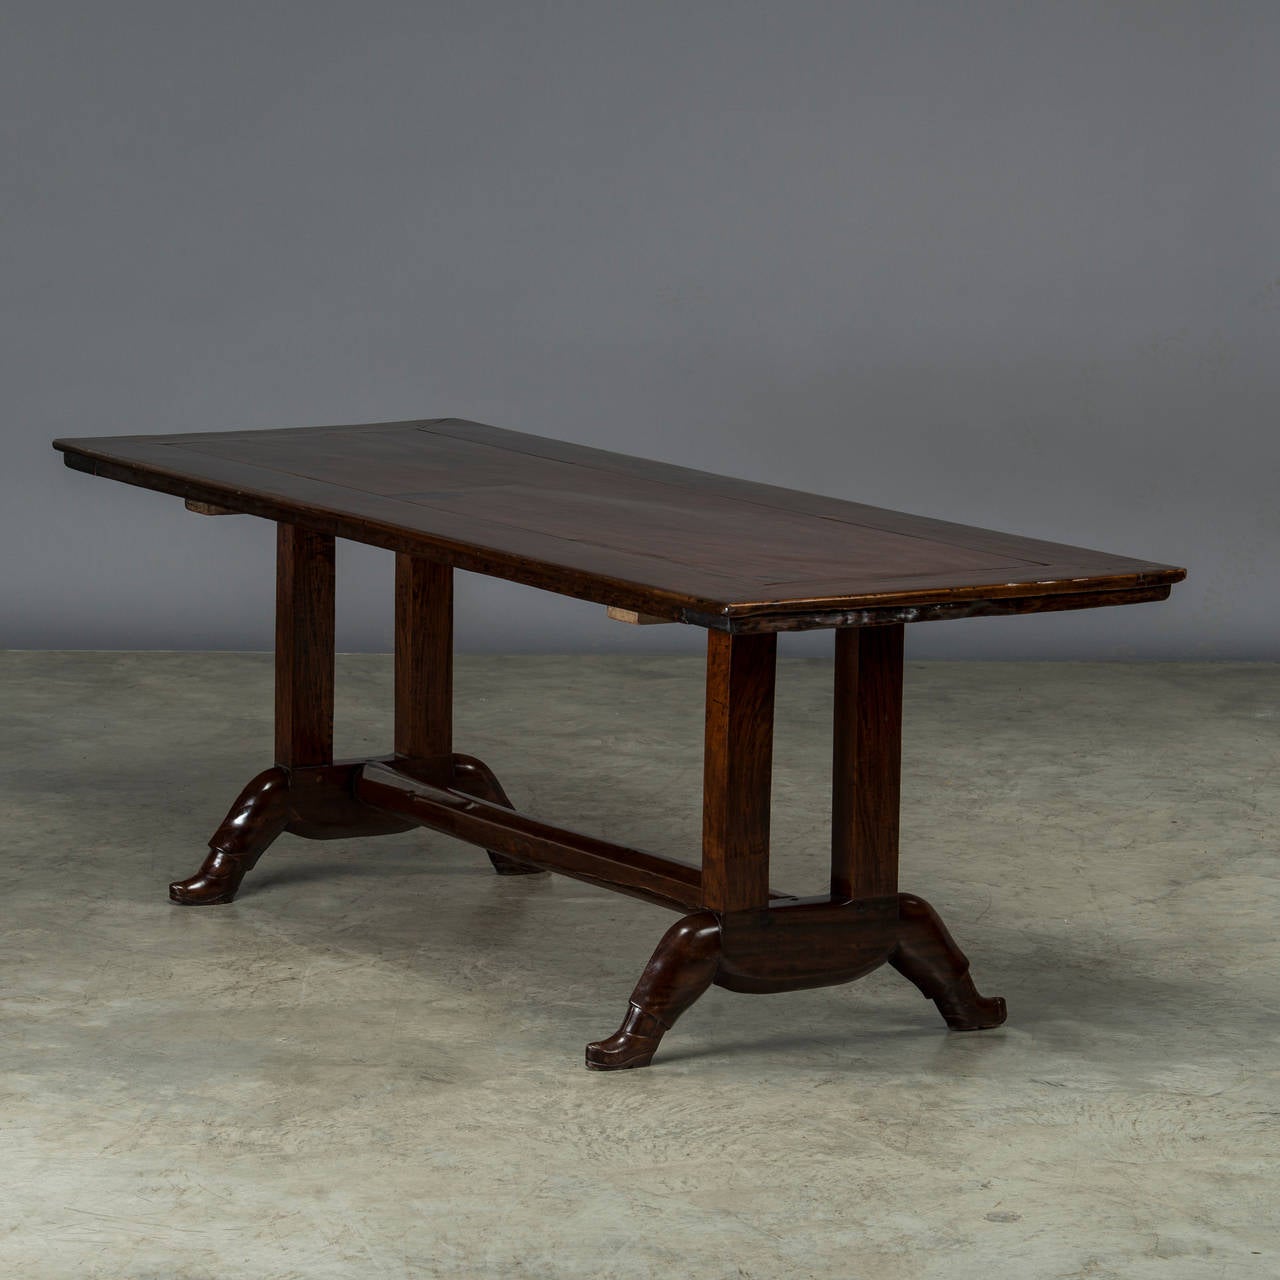 Table from the Philippines crafted in Narra hardwood. Table legs with 